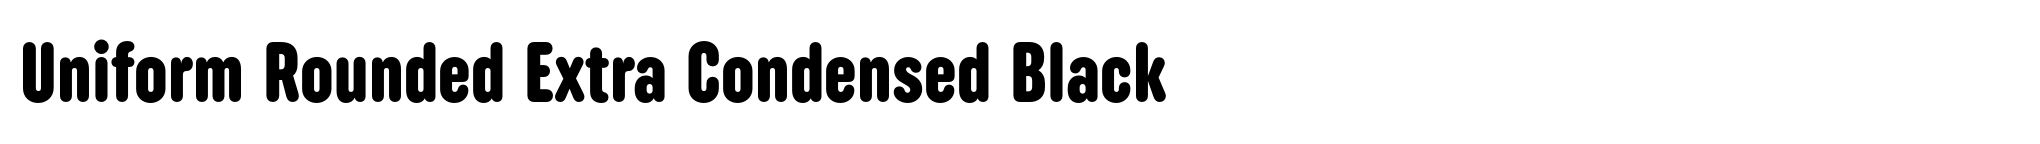 Uniform Rounded Extra Condensed Black image